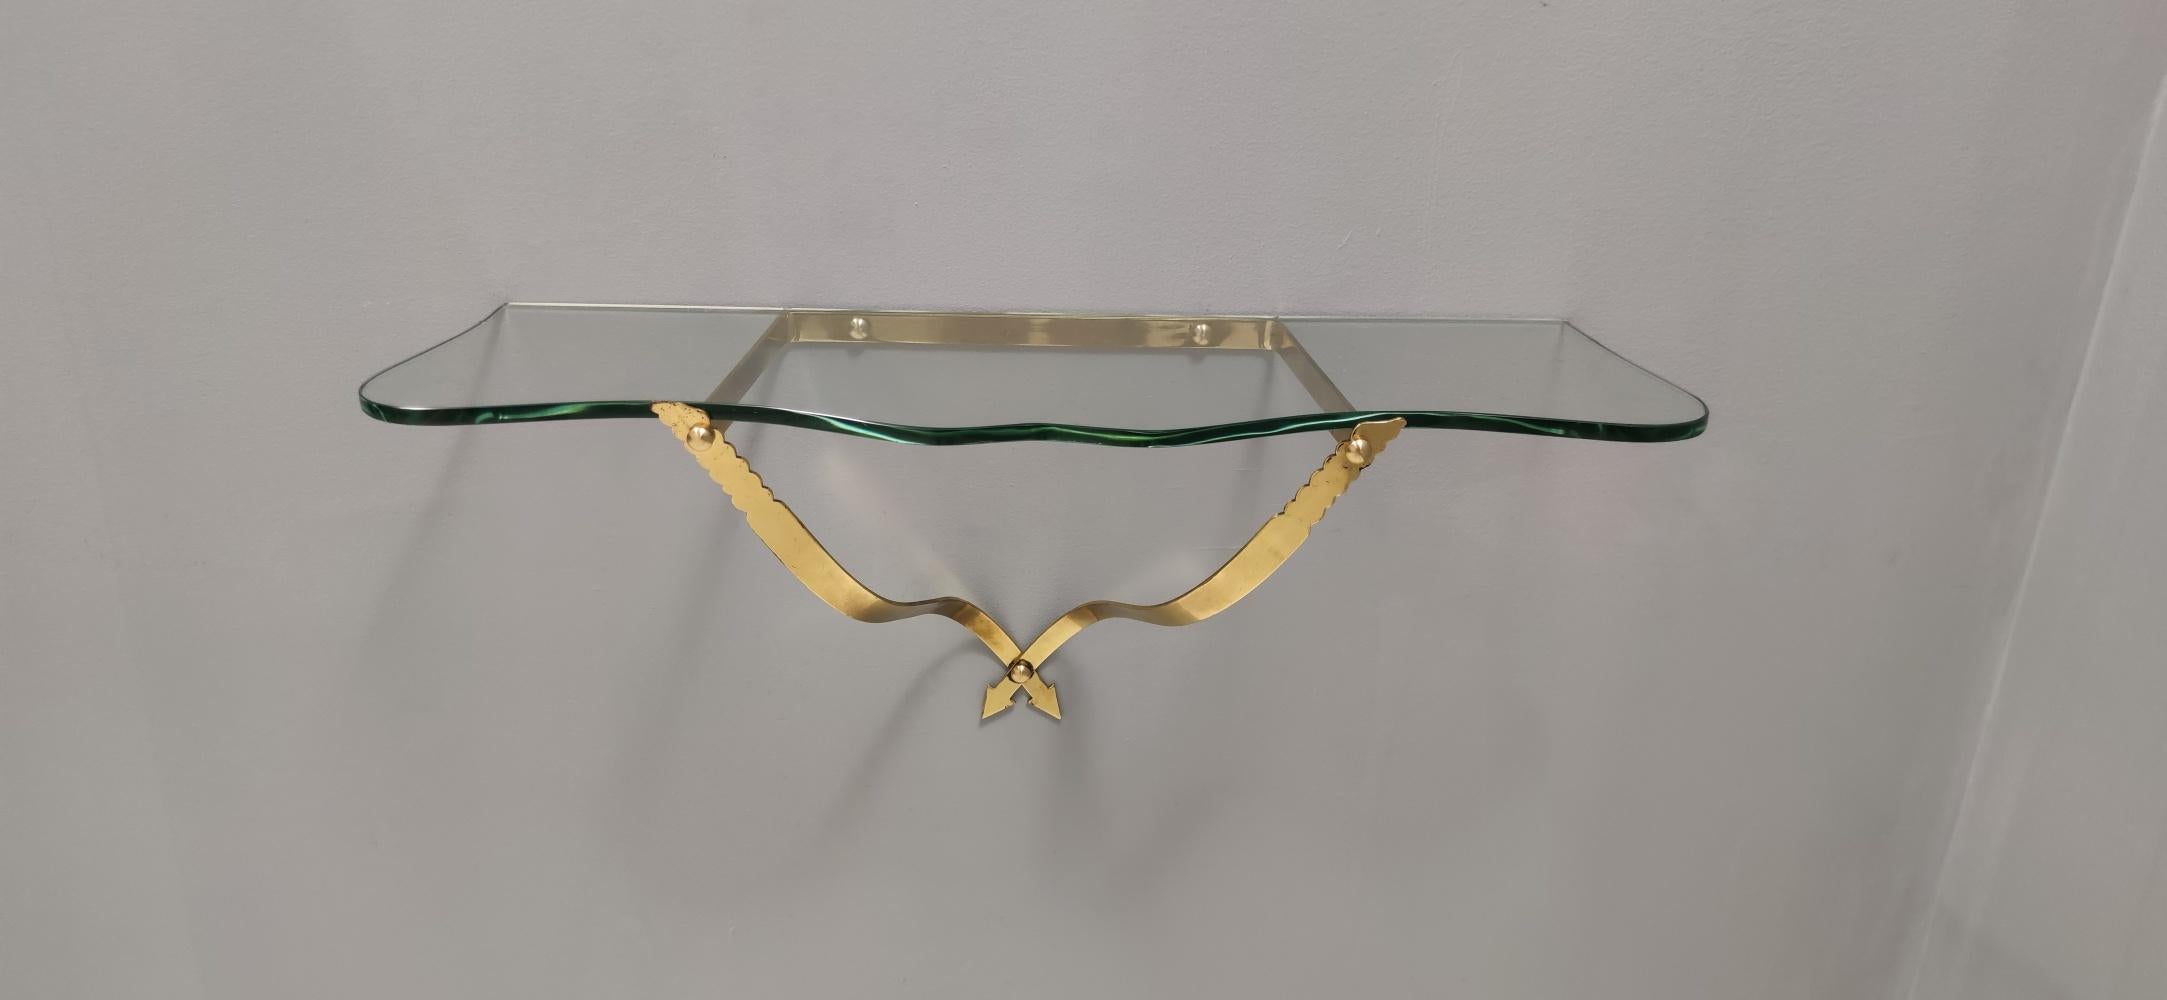 Mid-20th Century Vintage Crystal and Brass Wall-Mounted Console Table by Cristal Art, Turin Italy